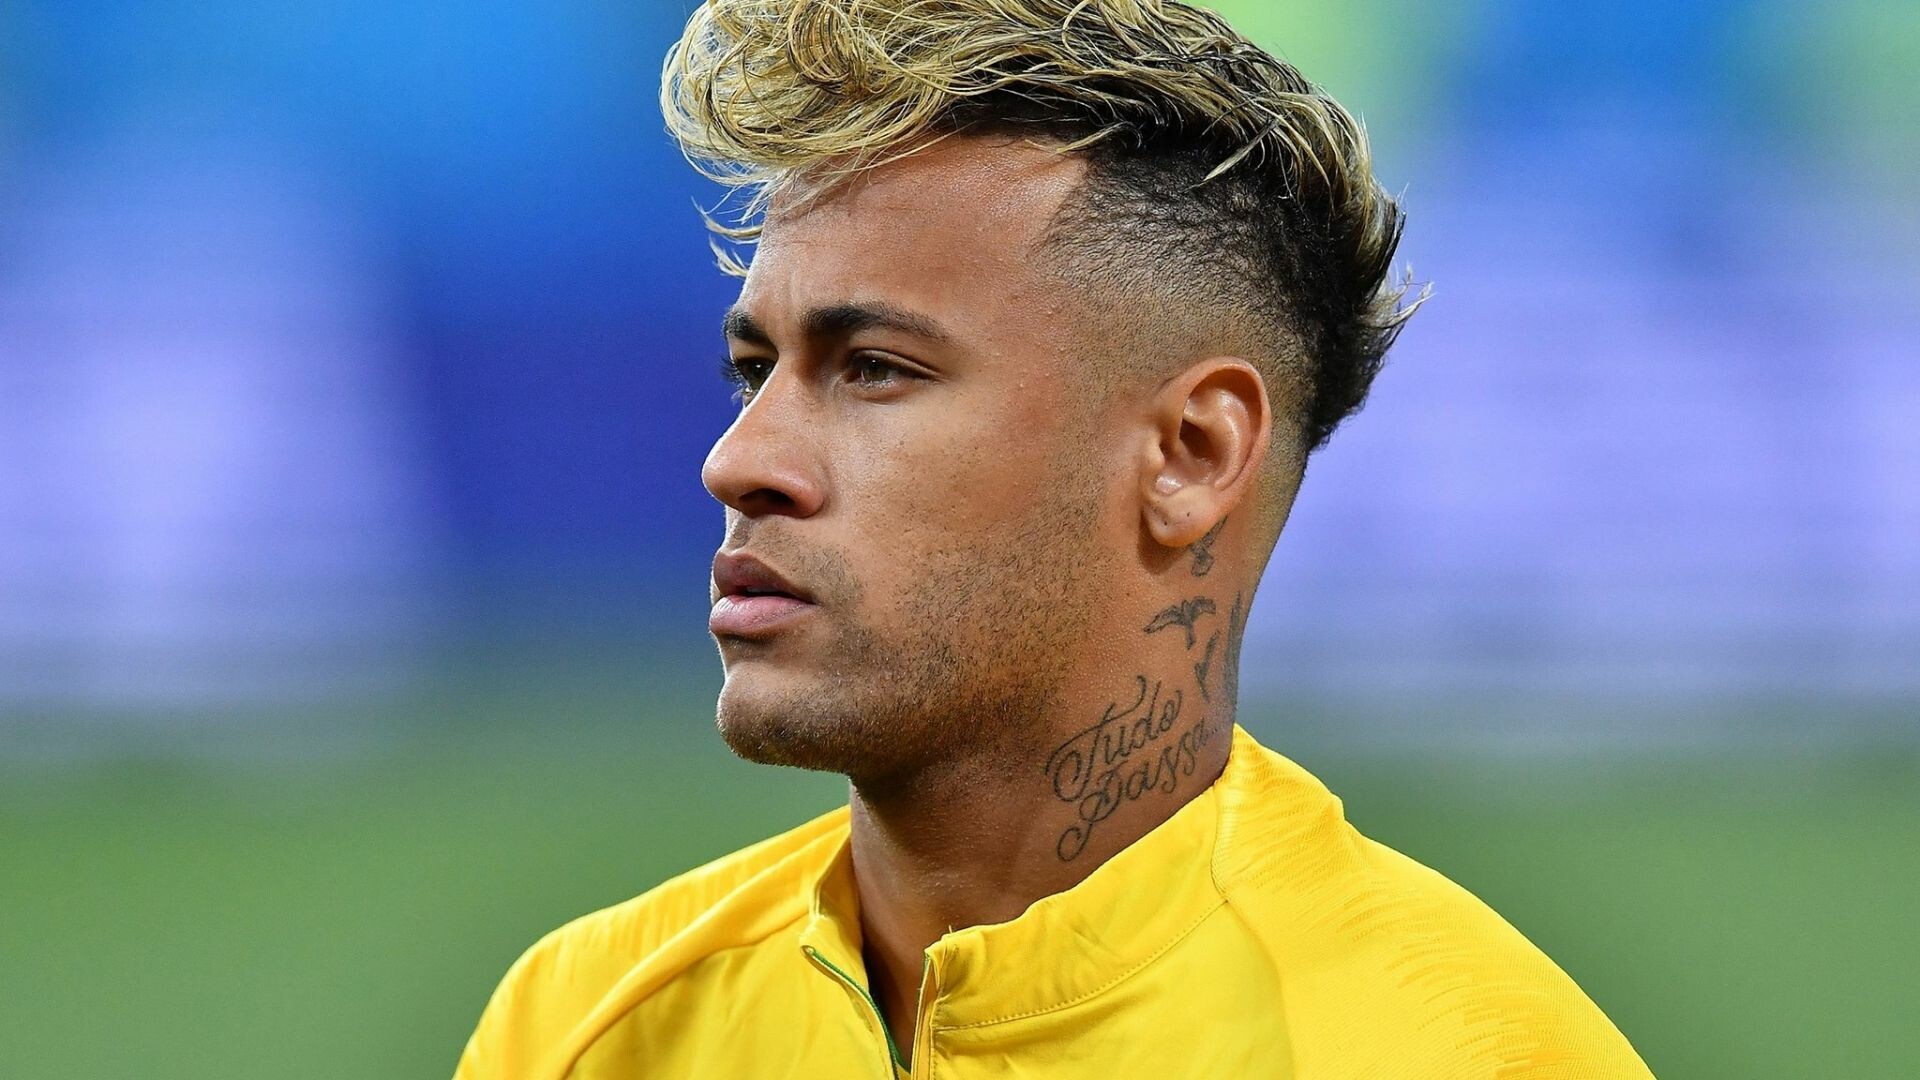 Neymar: Football player, He scored five goals for Santos in an 8–1 rout of Guarani on 15 April 2010. 1920x1080 Full HD Wallpaper.